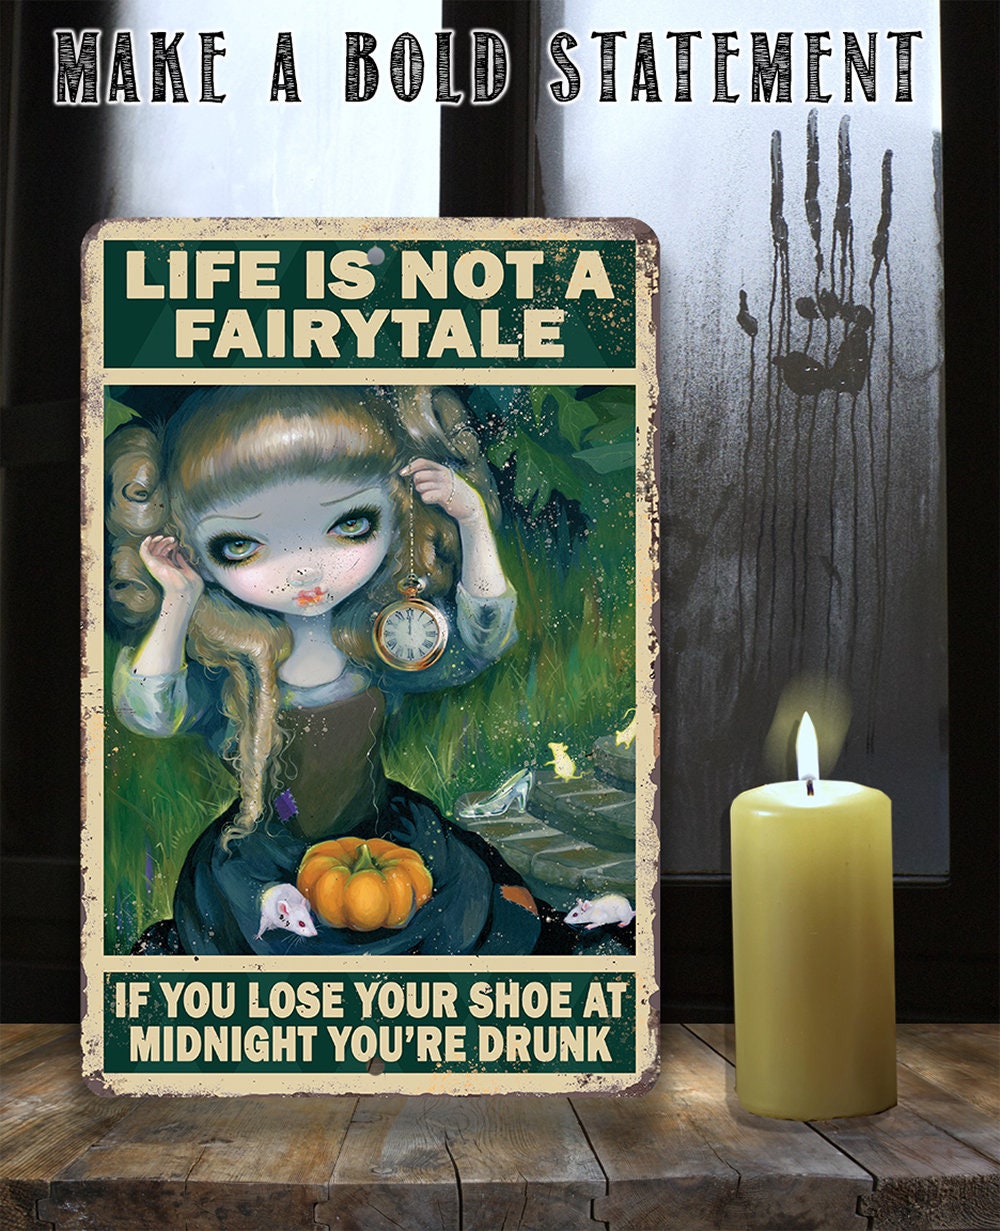 Life Is Not A Fairytale 8" x 12" or 12" x 18" Aluminum Tin Awesome Gothic Metal Poster Lone Star Art 